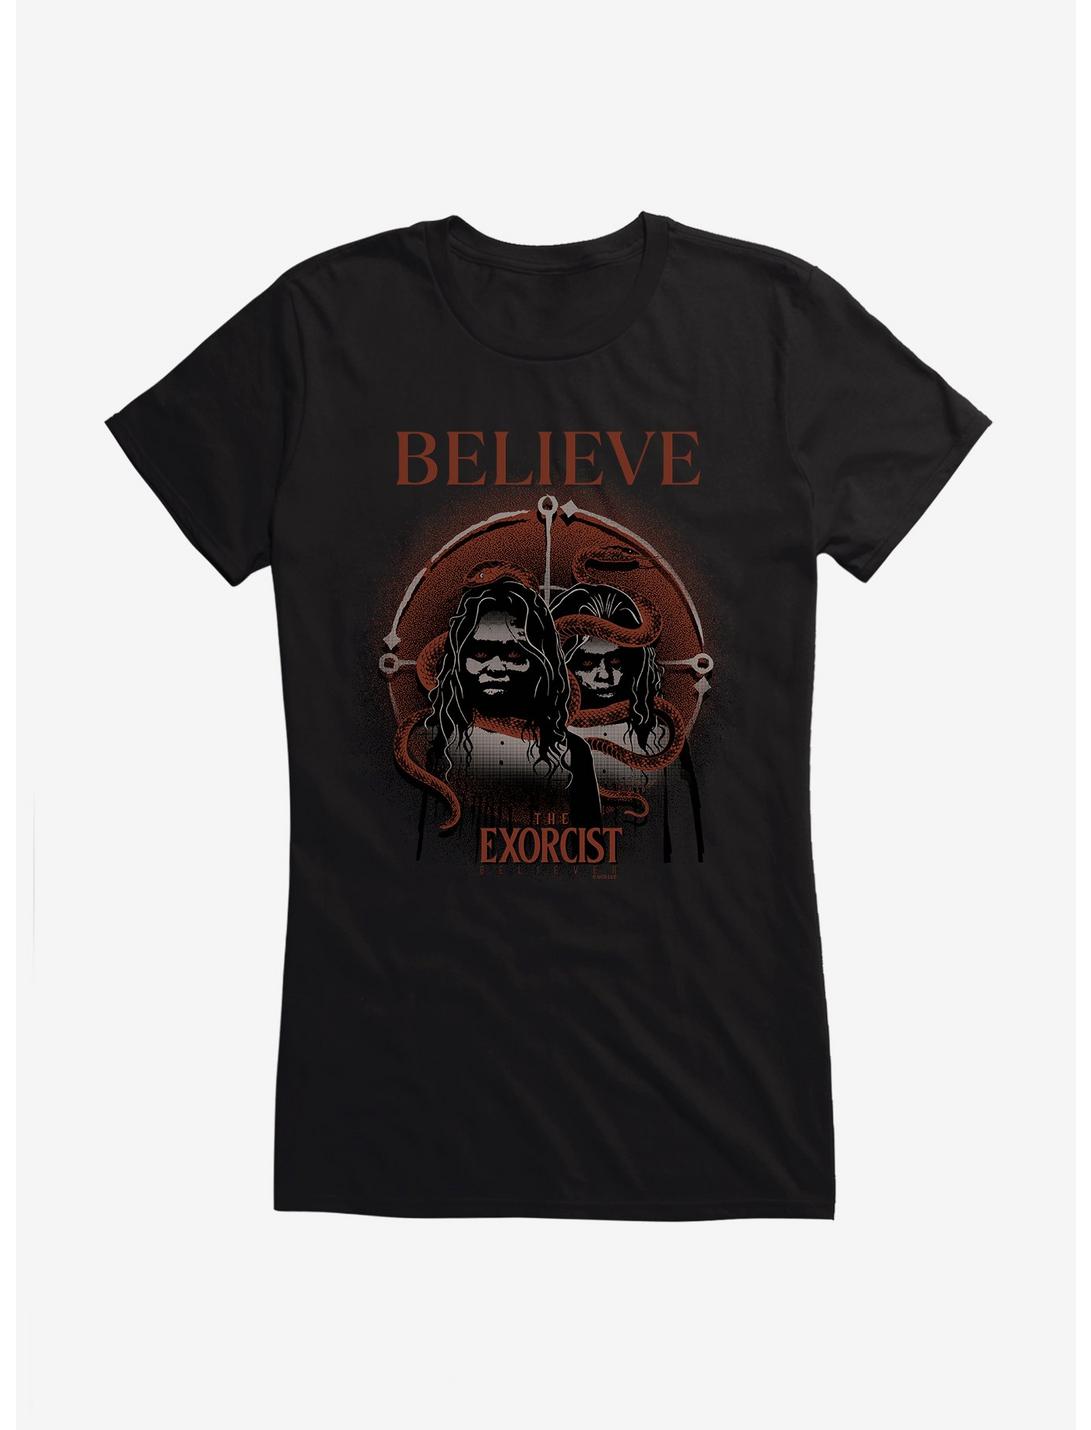 The Exorcist Believer Believe Girls T-Shirt, BLACK, hi-res